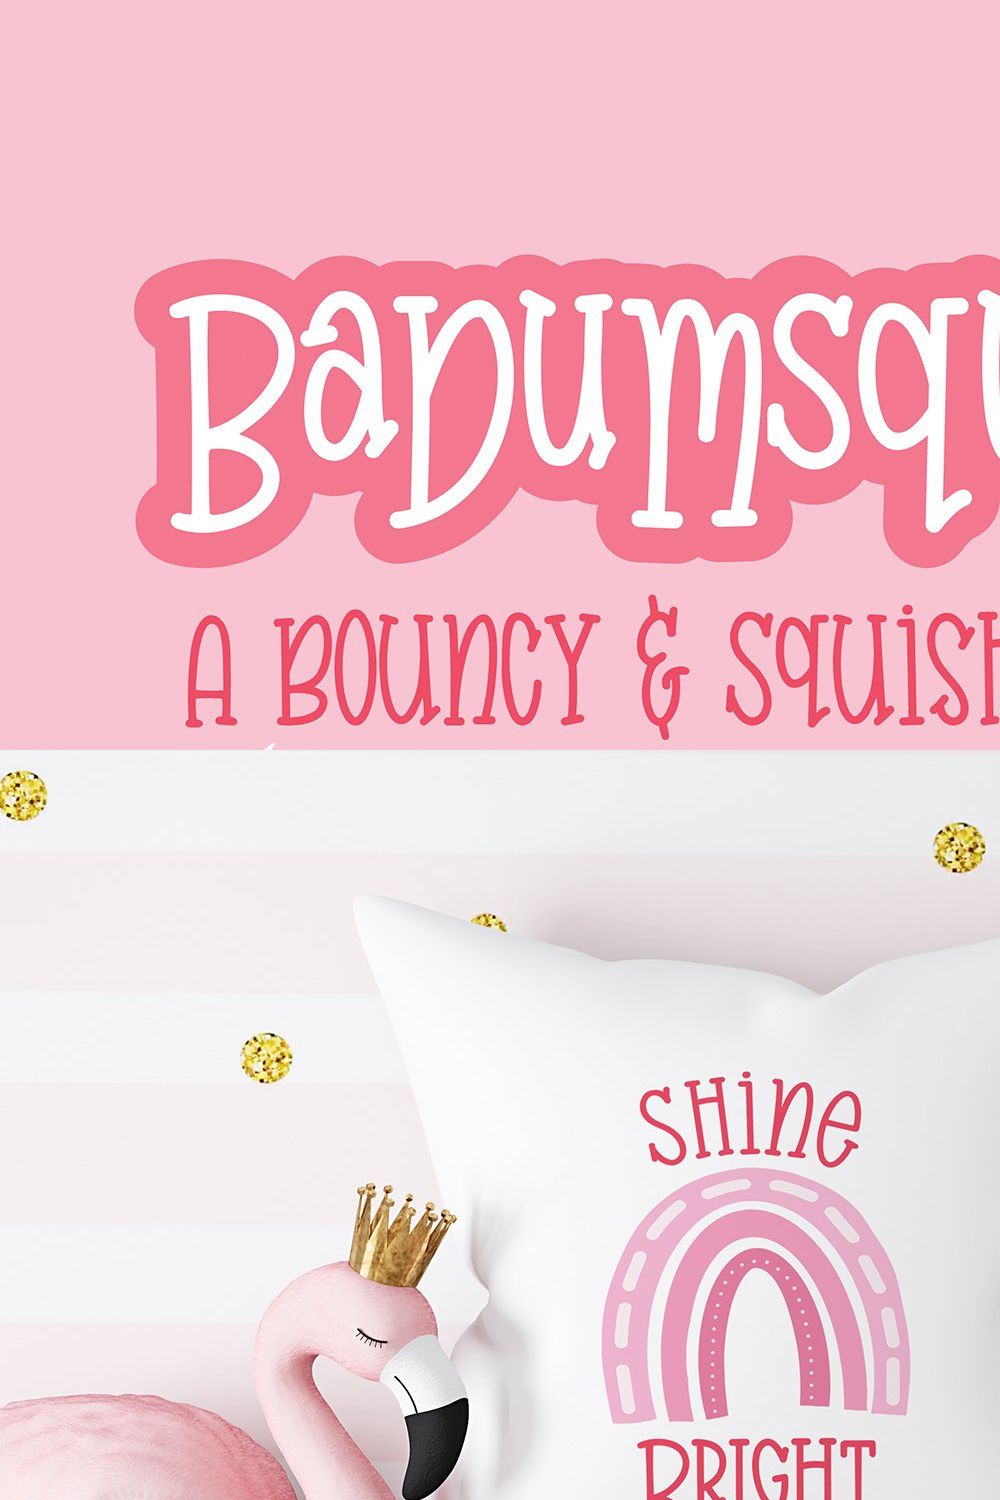 Badumsquish - a bouncy squishy font! pinterest preview image.